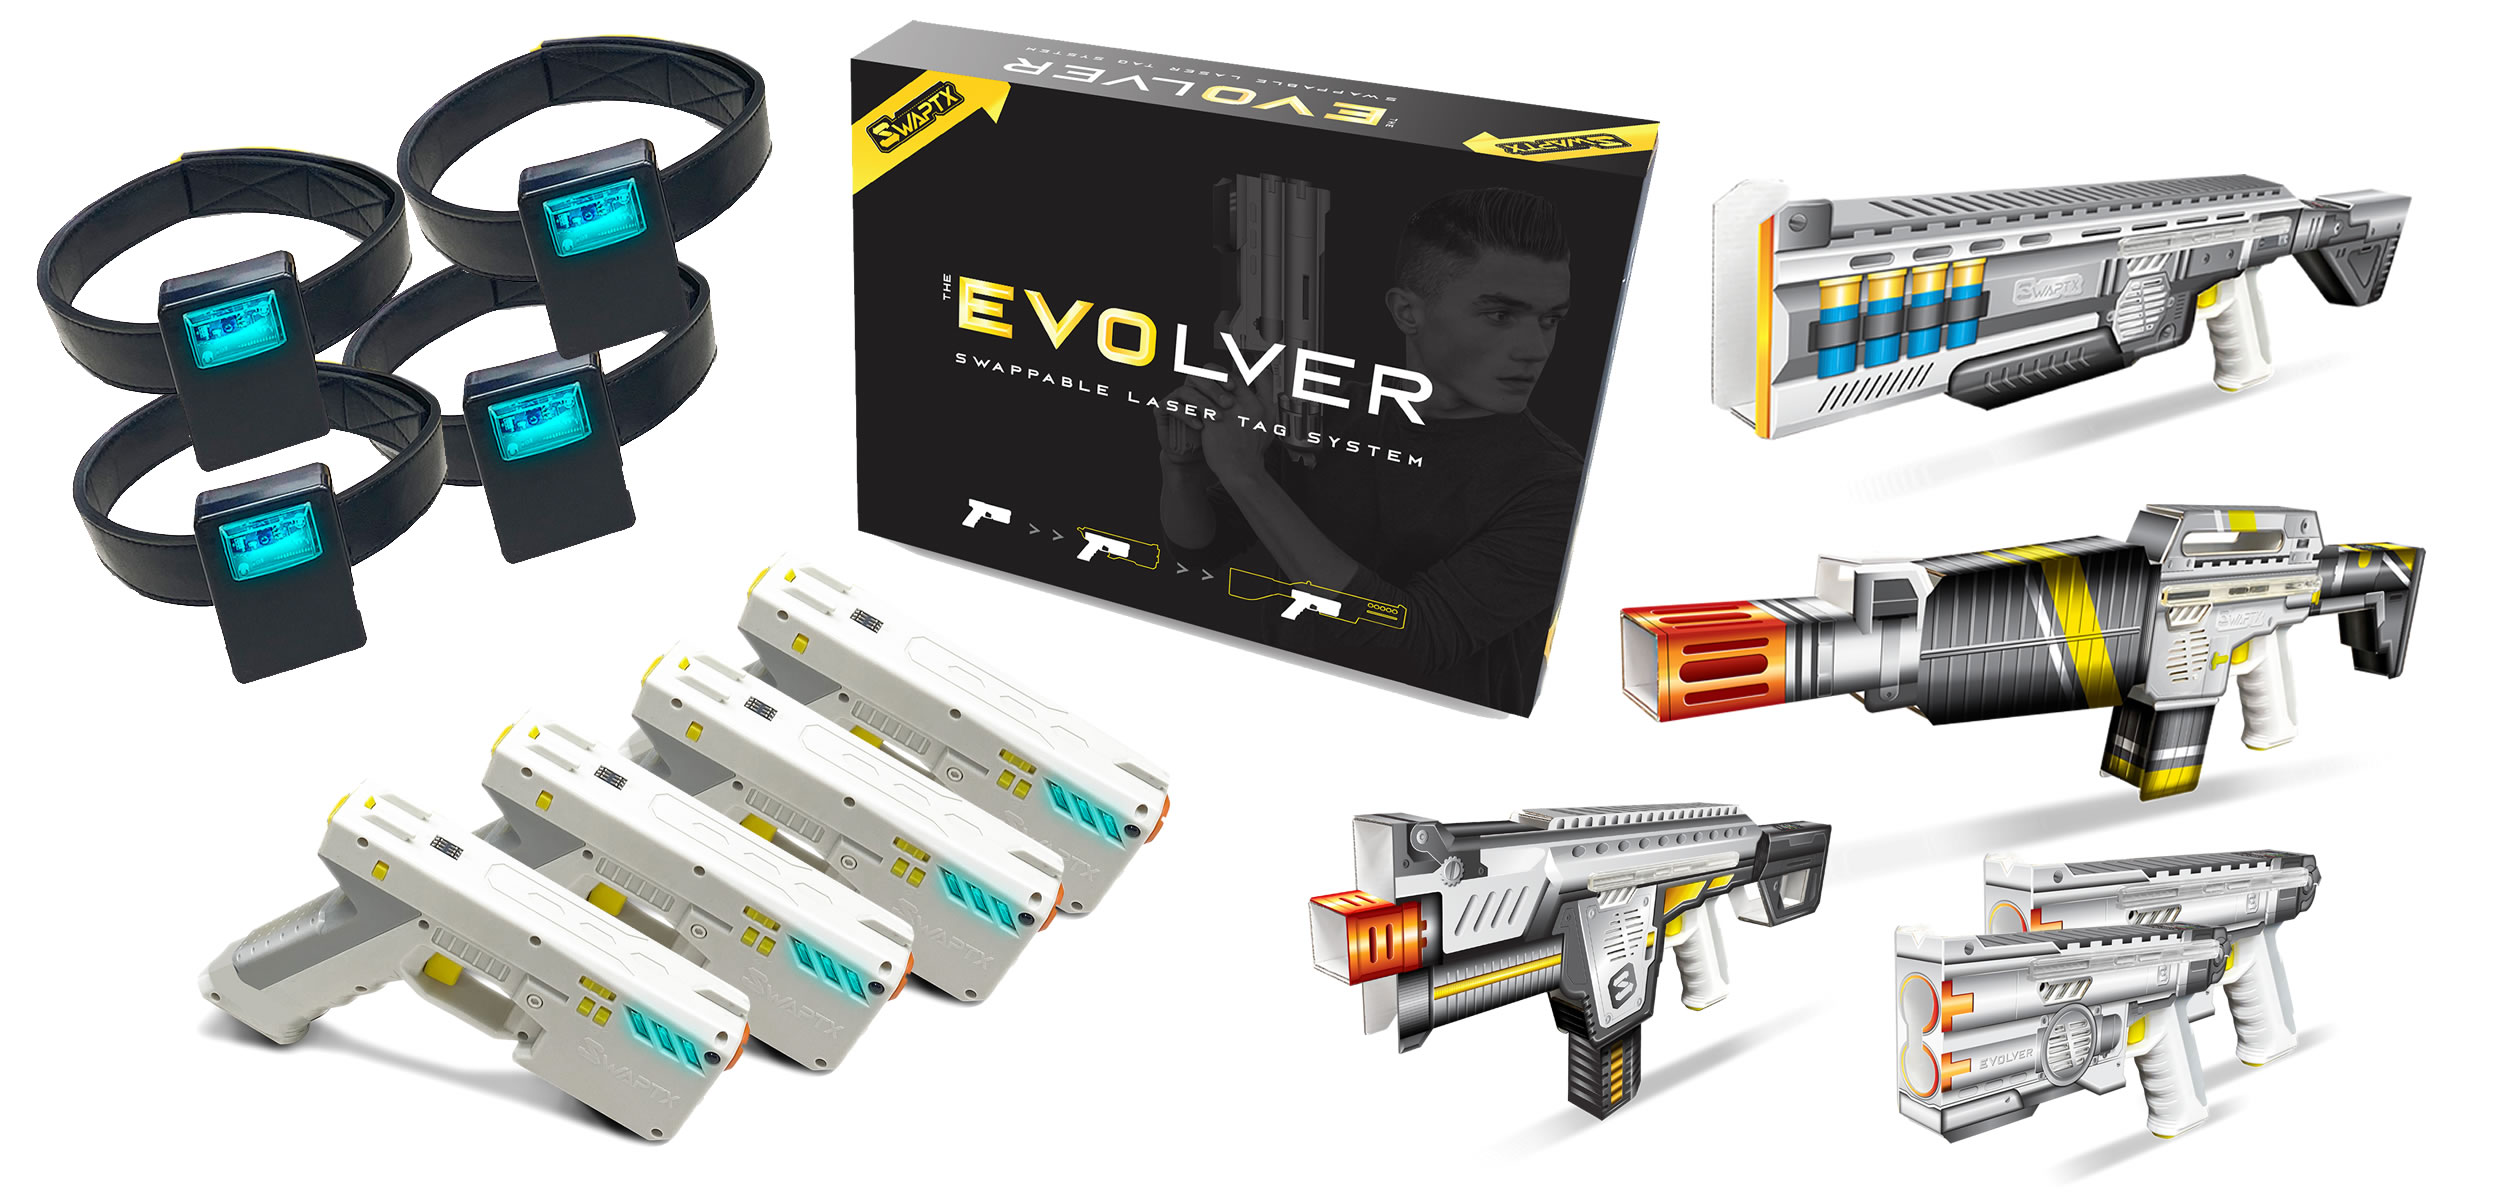 evolver with headset 4 players set